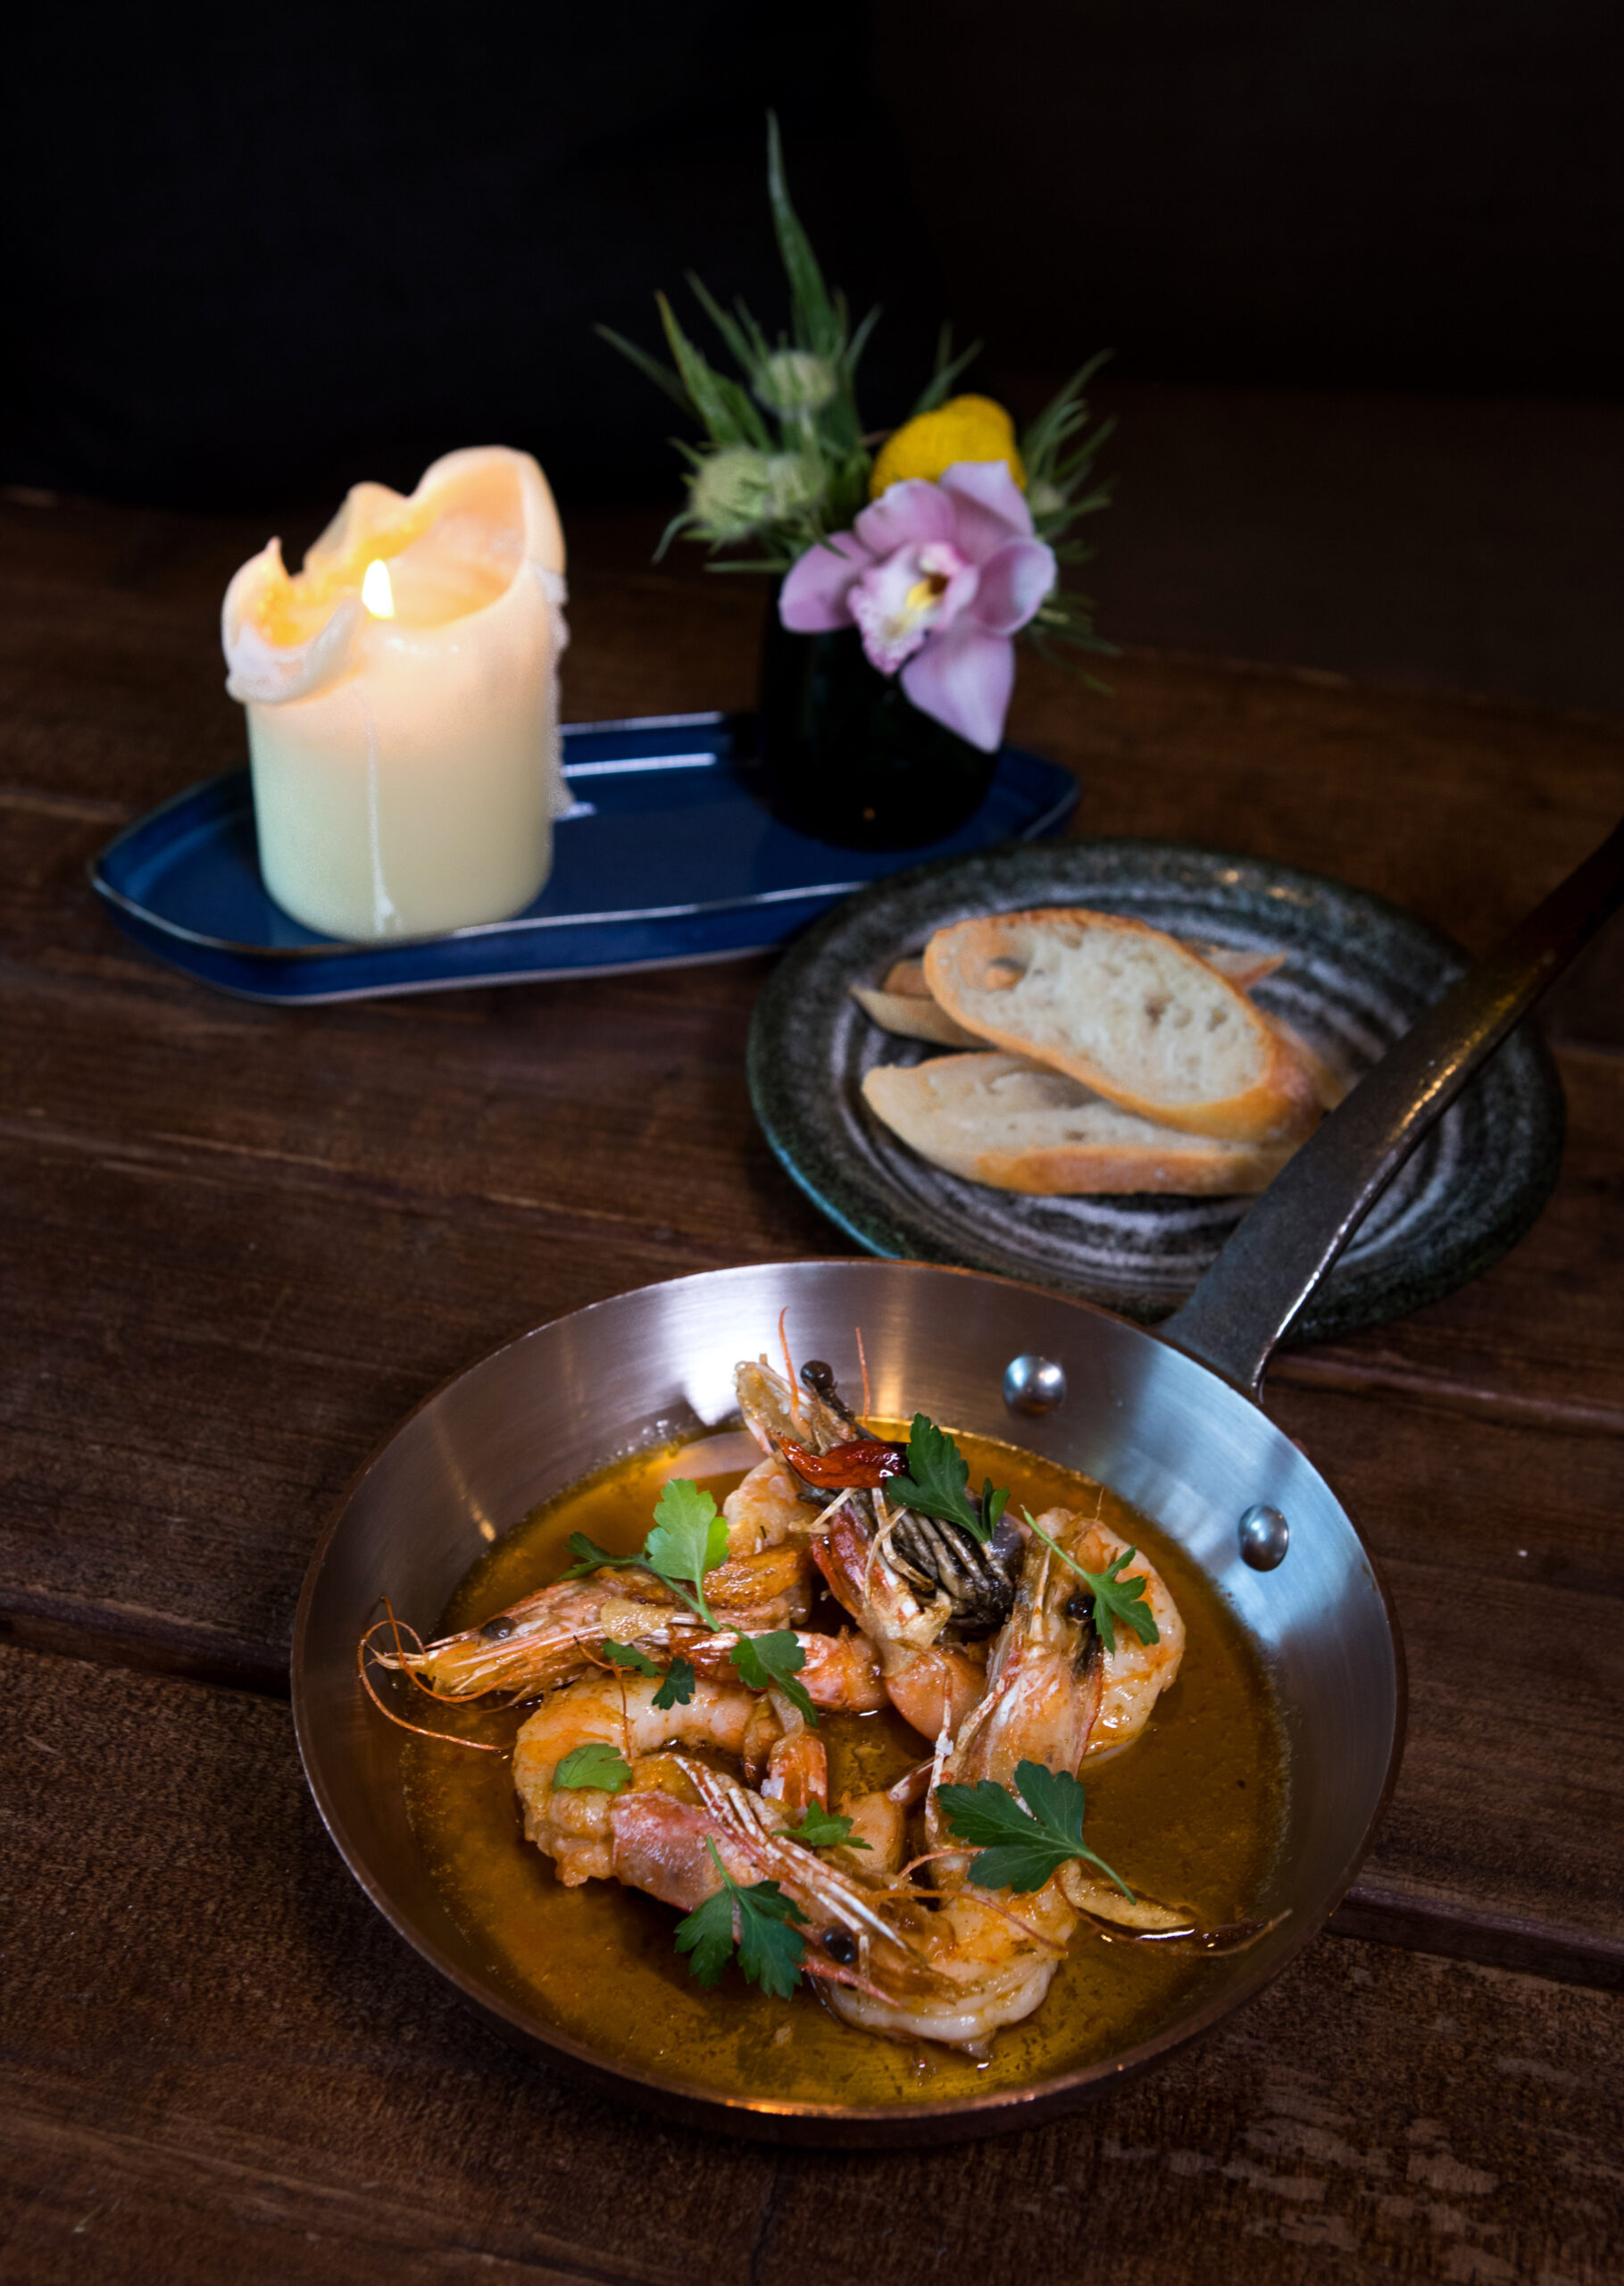 Gambas al ajillo, includes prawns, roasted garlic and olive oil, at Animo, a restaurant in Sonoma, Calif., on Wednesday, March 30, 2022. (Photo by Darryl Bush / For The Press Democrat)